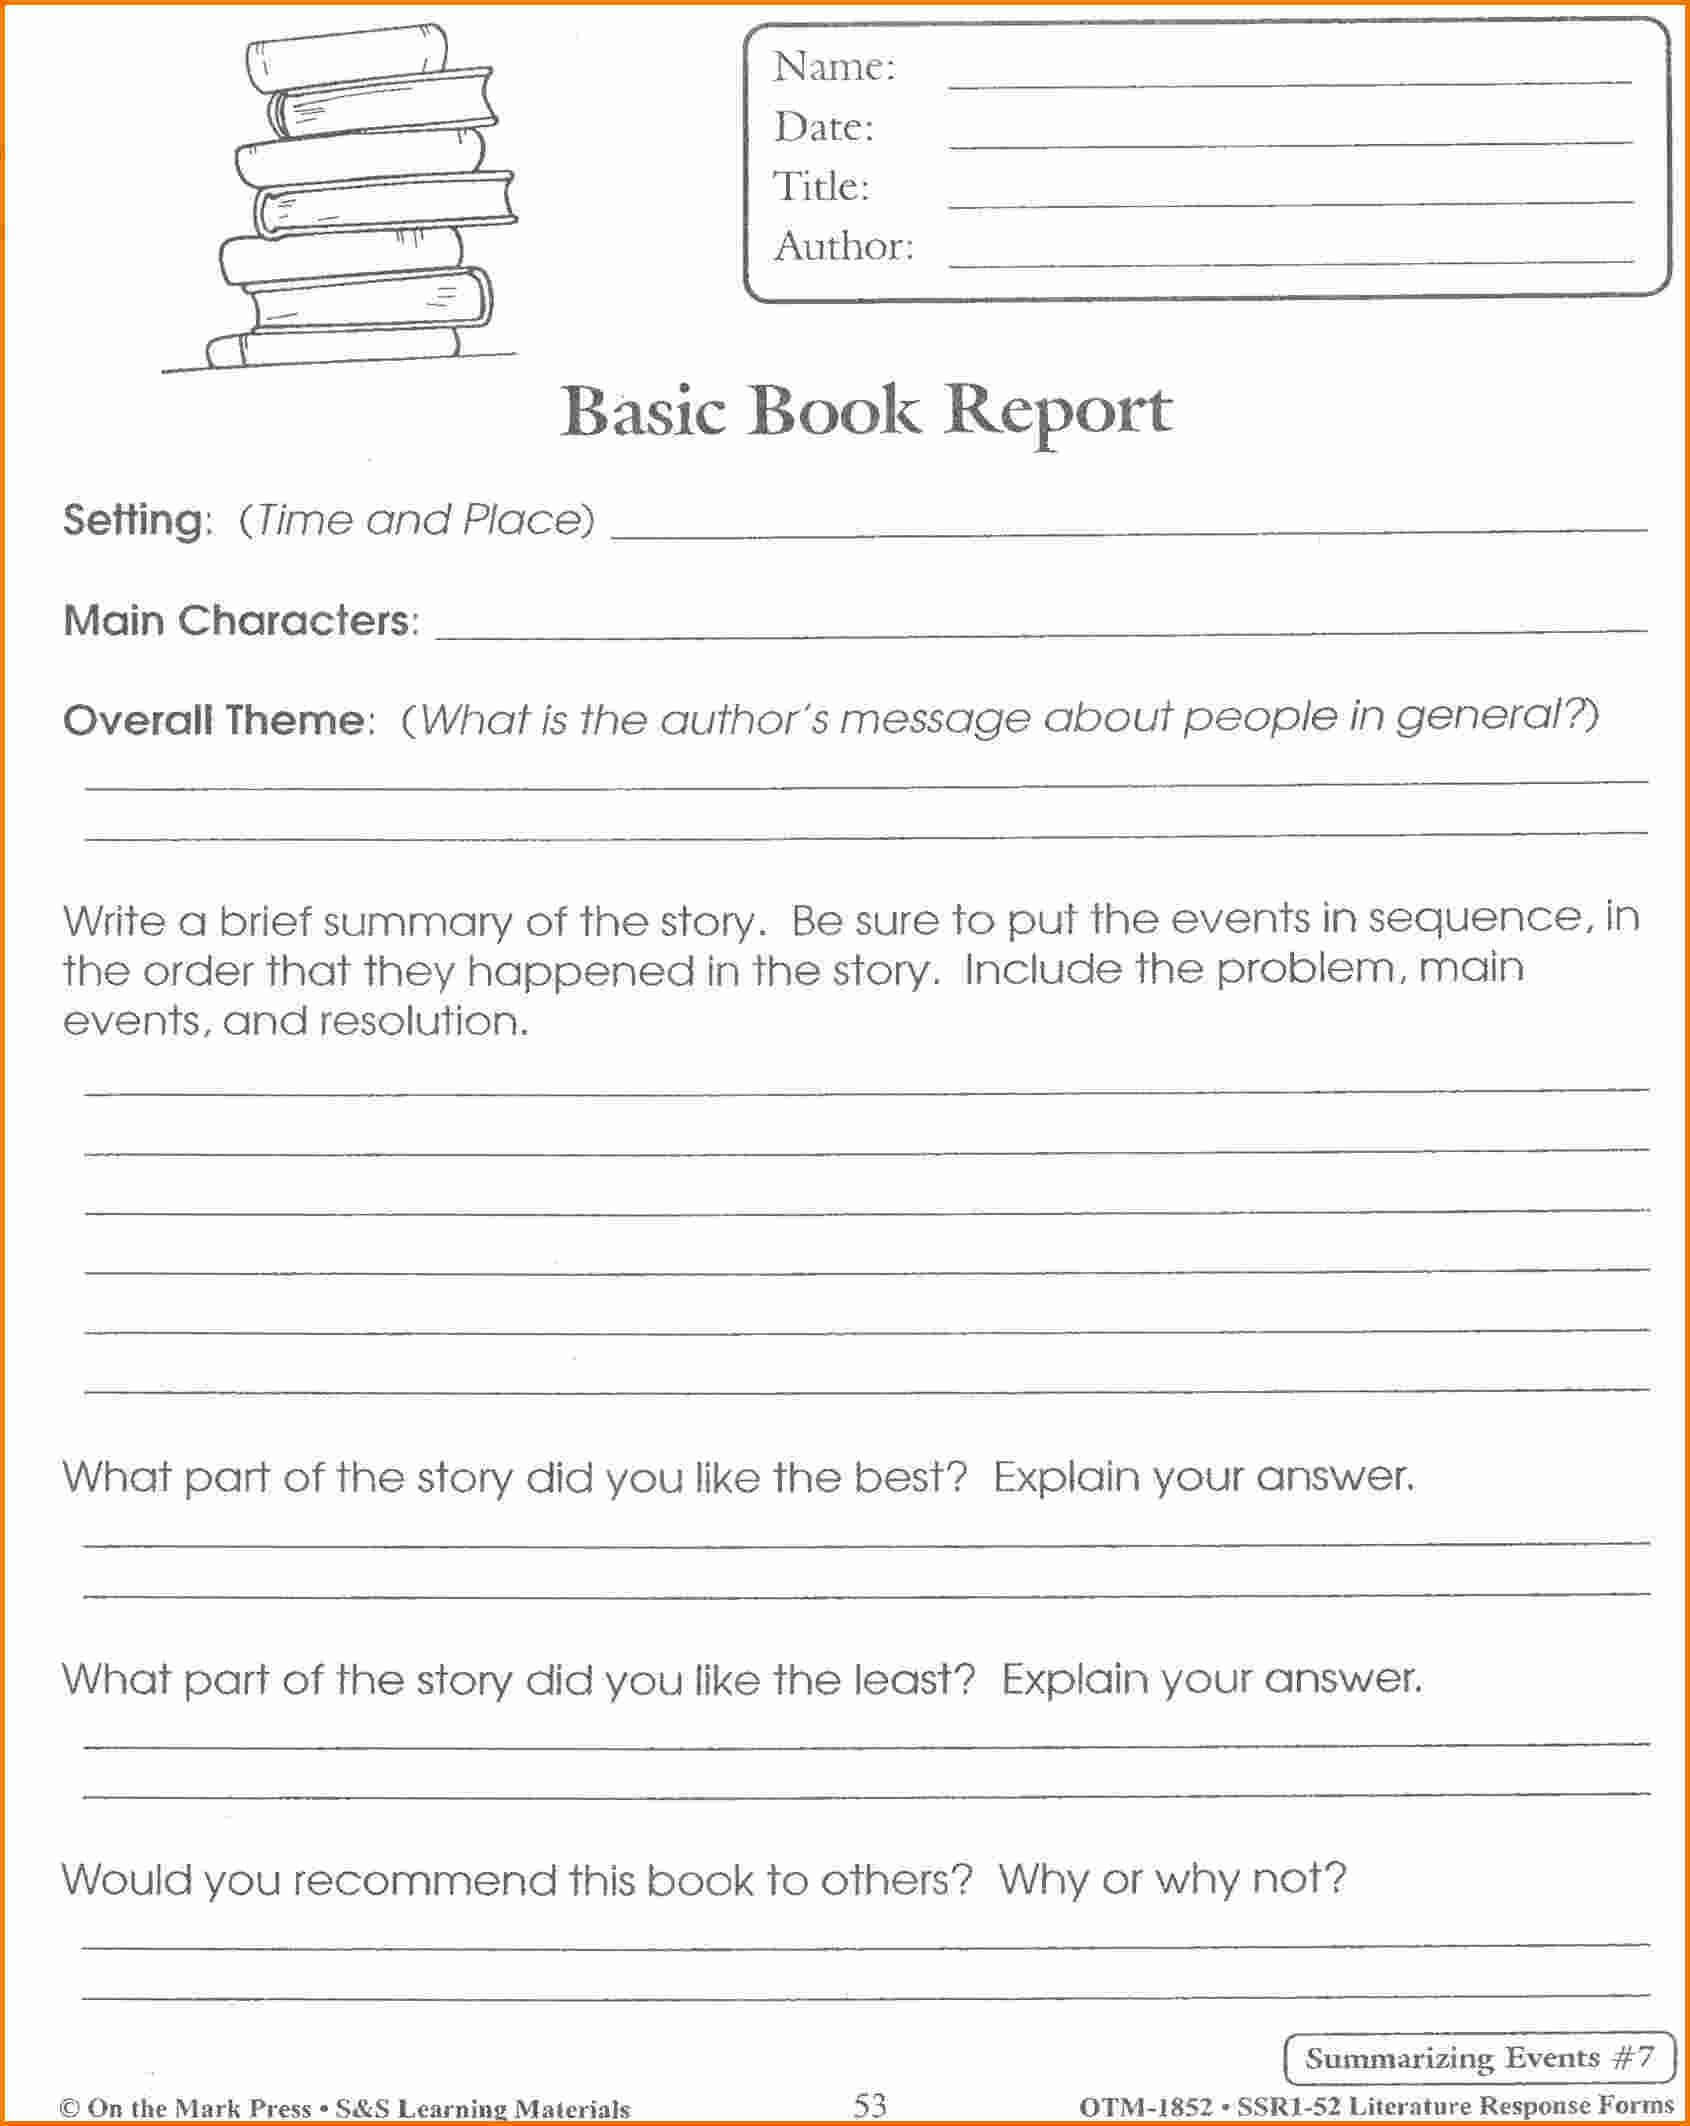 Pinmarcus Tong On Book | Book Report Templates, Book Pertaining To Book Report Template 4Th Grade